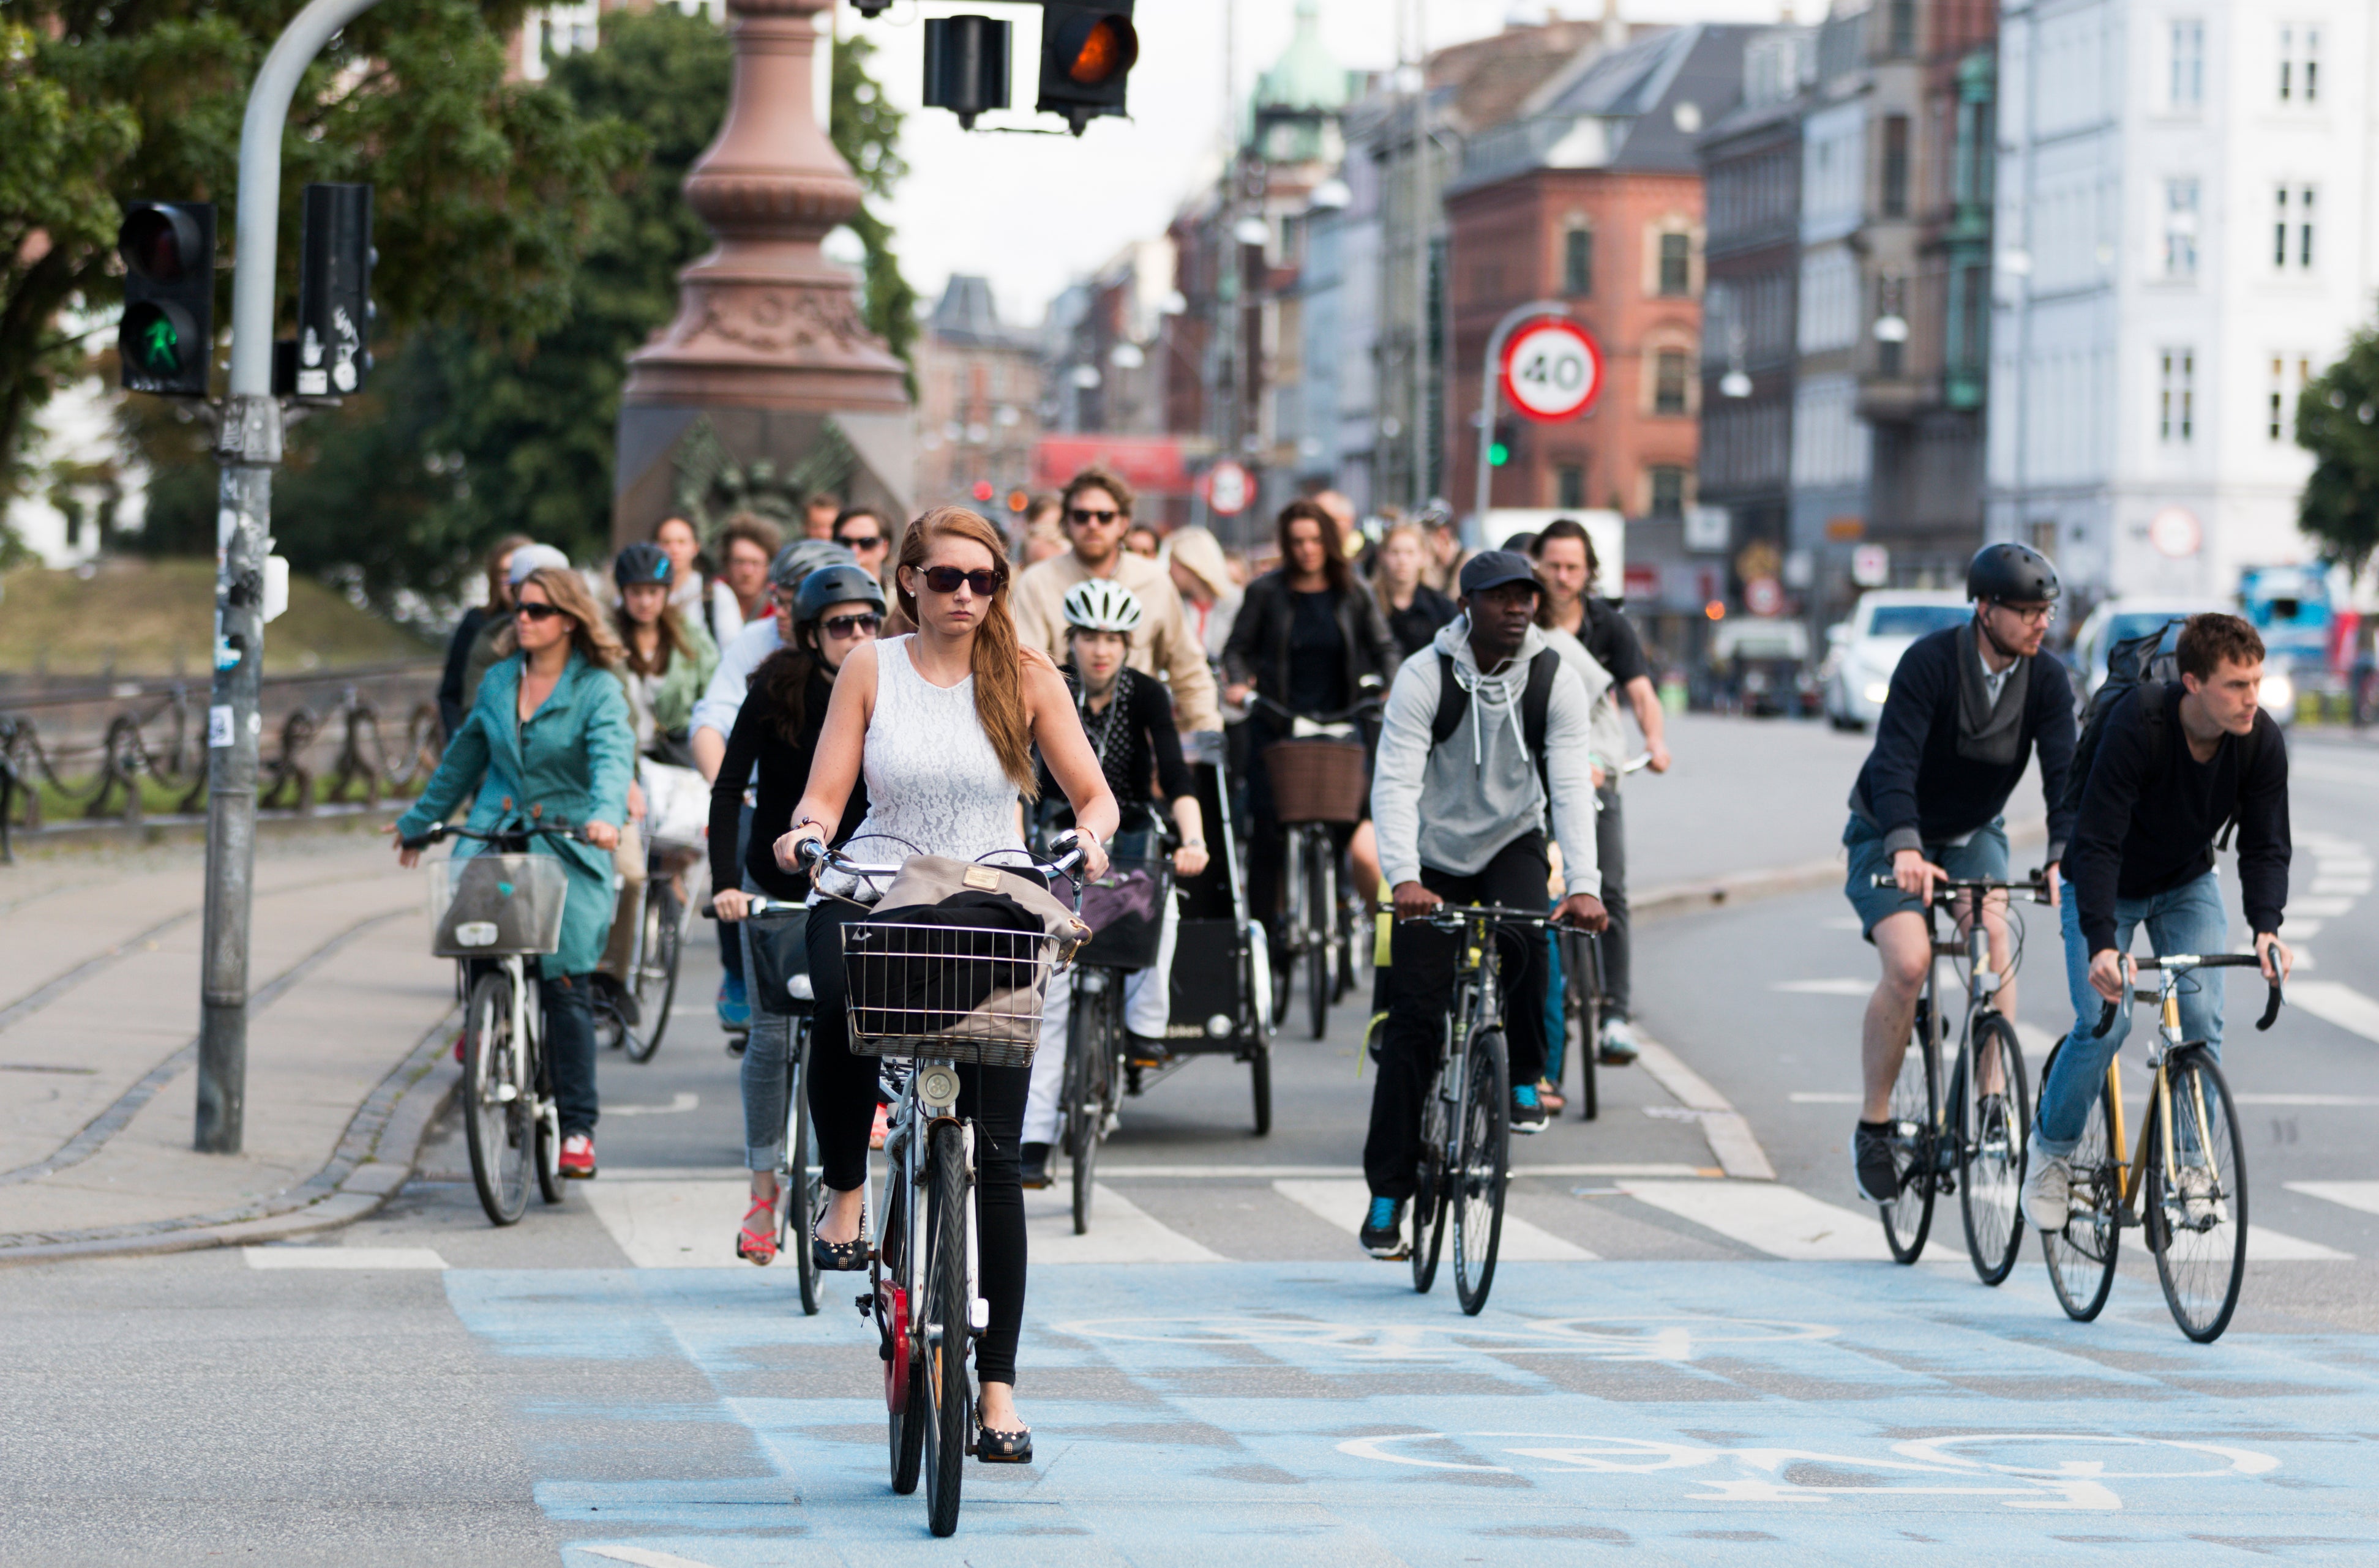 Proper cycling infrastructure needs to be part of the future of our cities